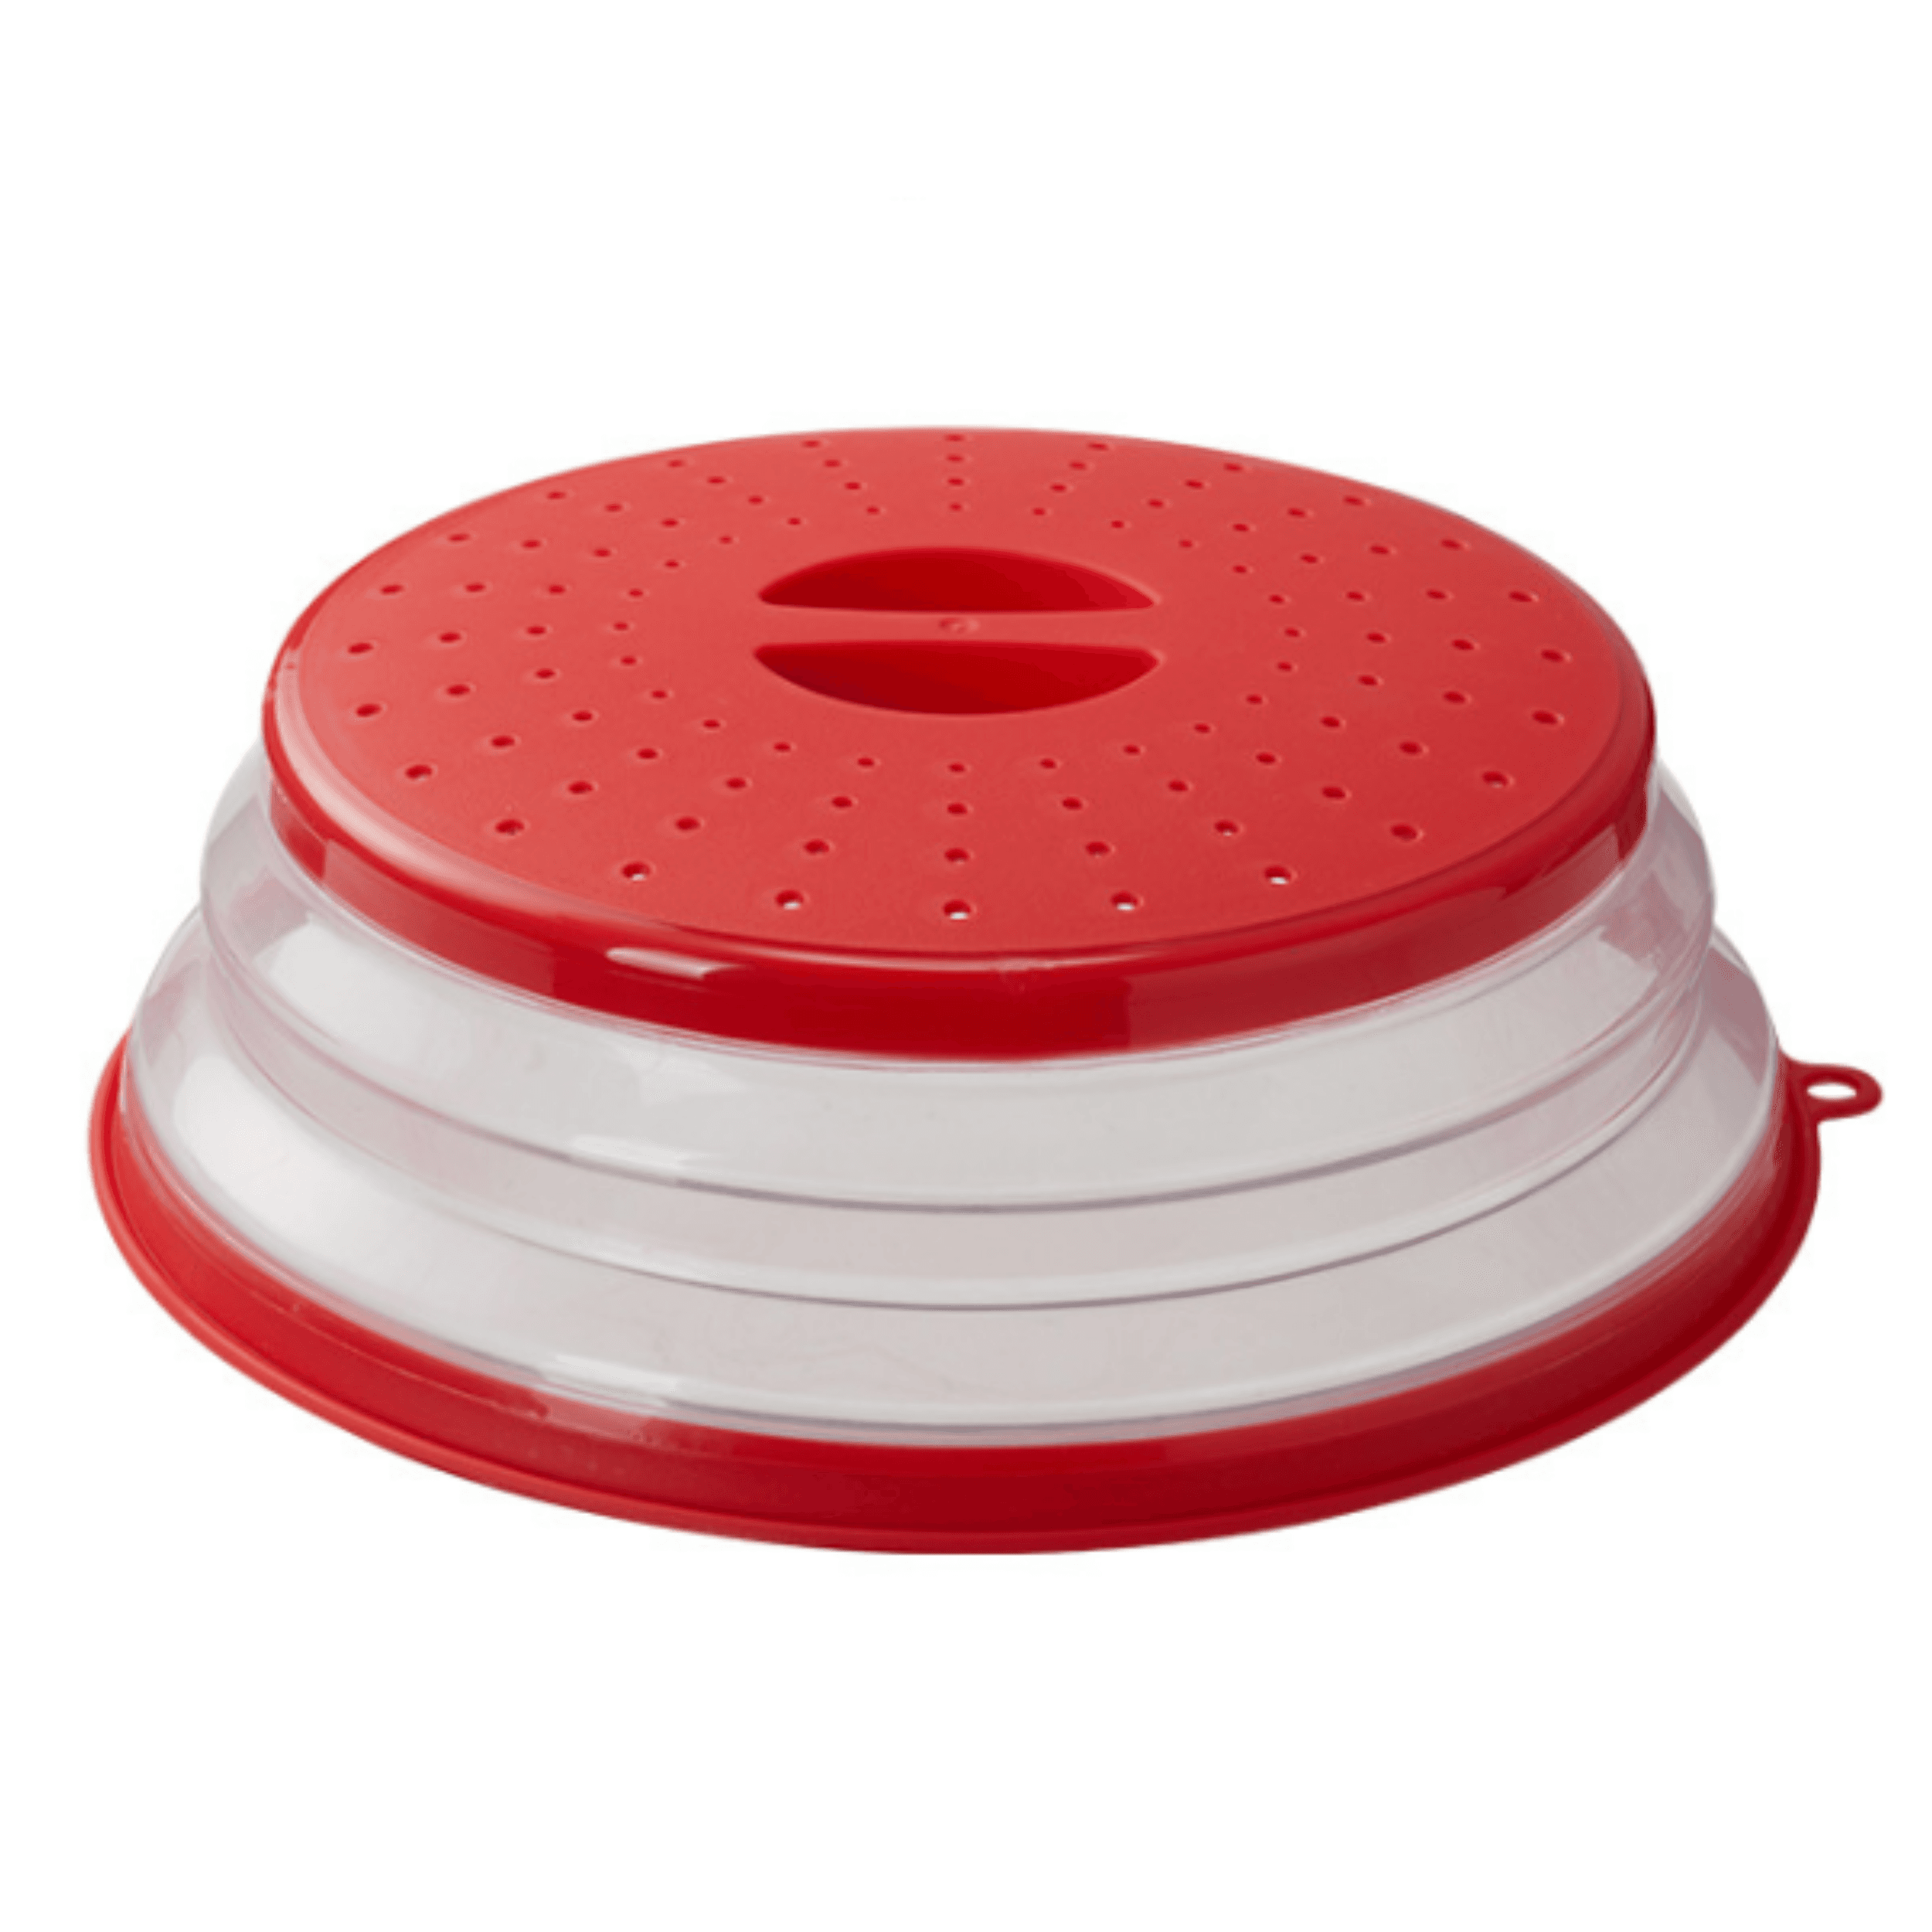 Folding lid / silicone cover for microwave oven - red